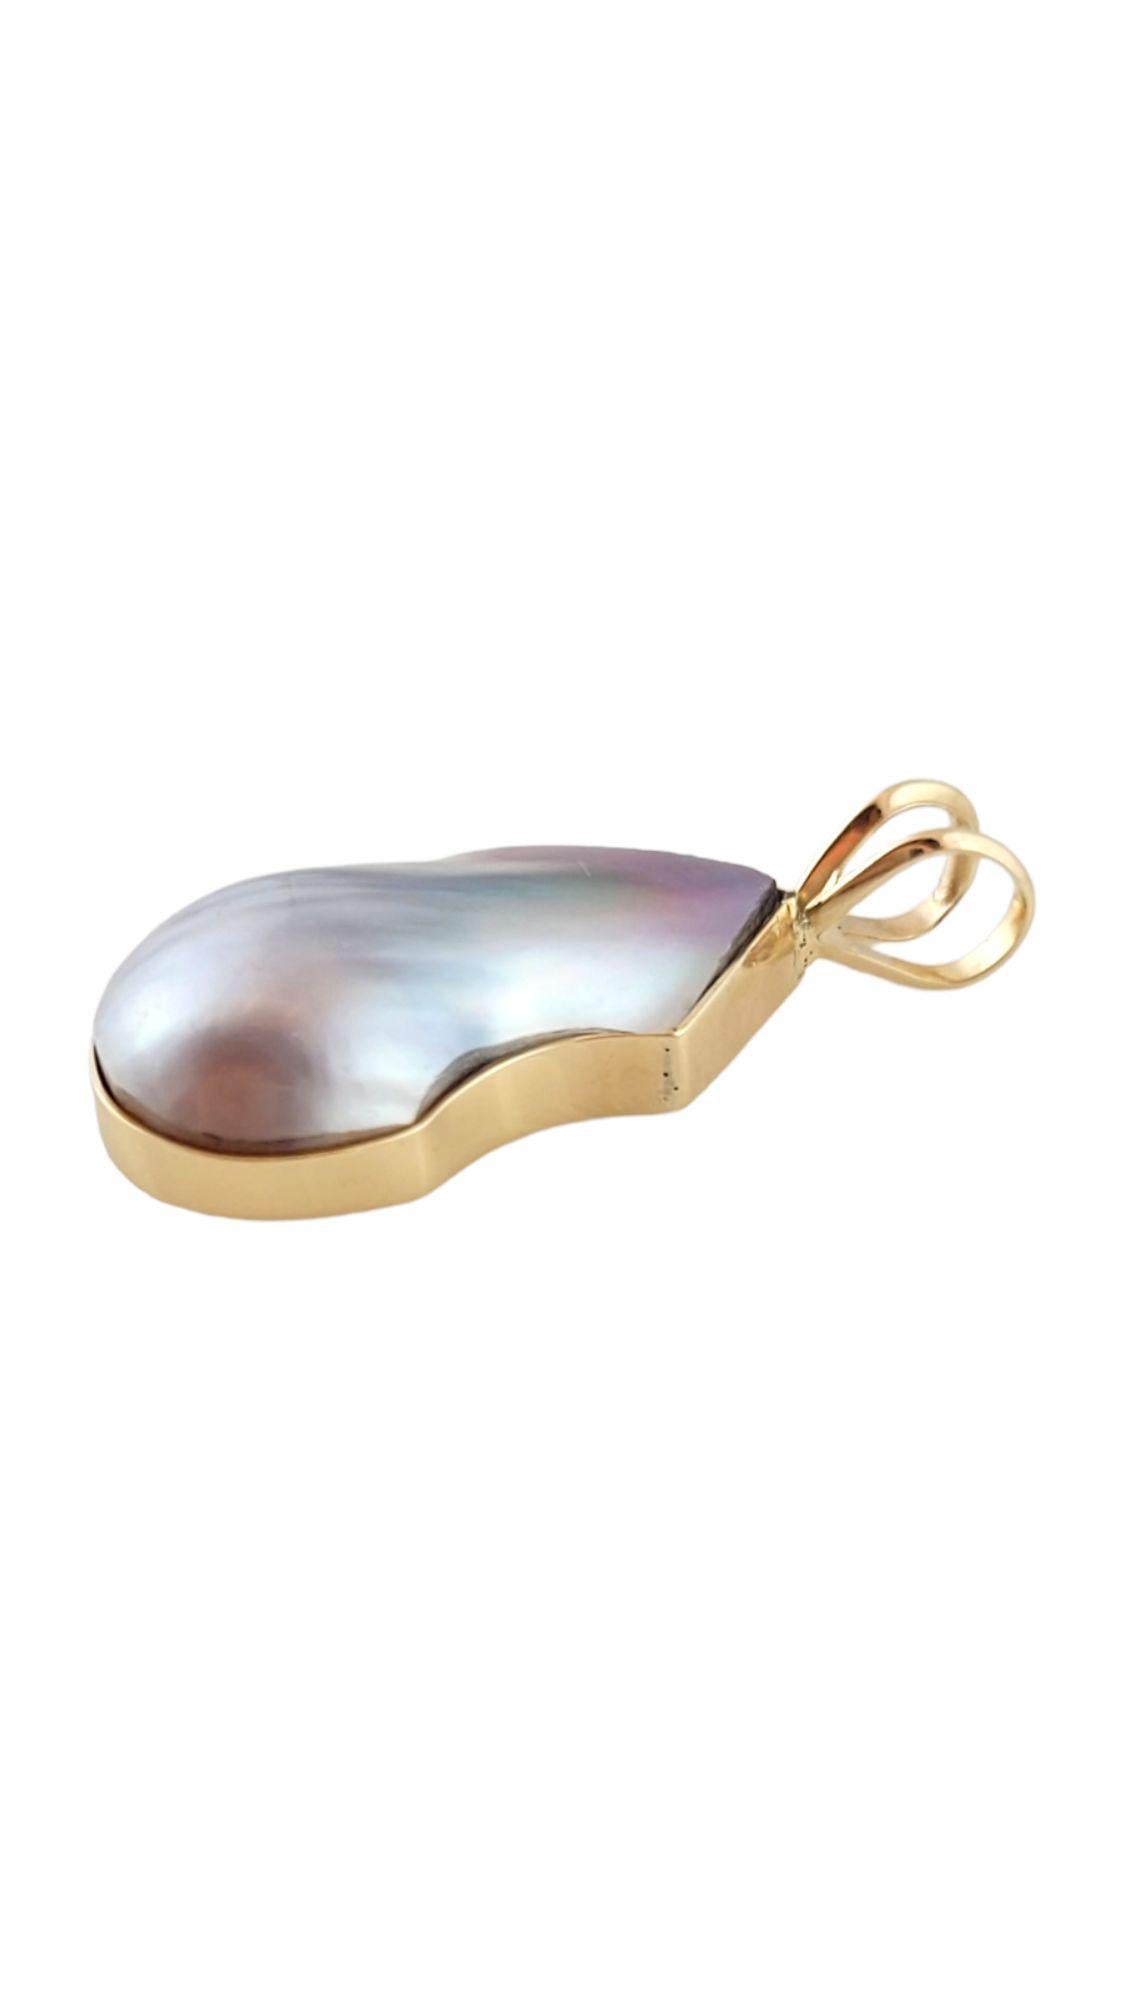 This gorgeous tear drop Mabe pearl is set in 14K yellow gold!

Size: 33mm X 14mm X 7.3mm

Weight: 4.26 g/ 2.7 dwt

Hallmark: 14K

*Chain not included*

Very good condition, professionally polished.

Will come packaged in a gift box or pouch (when